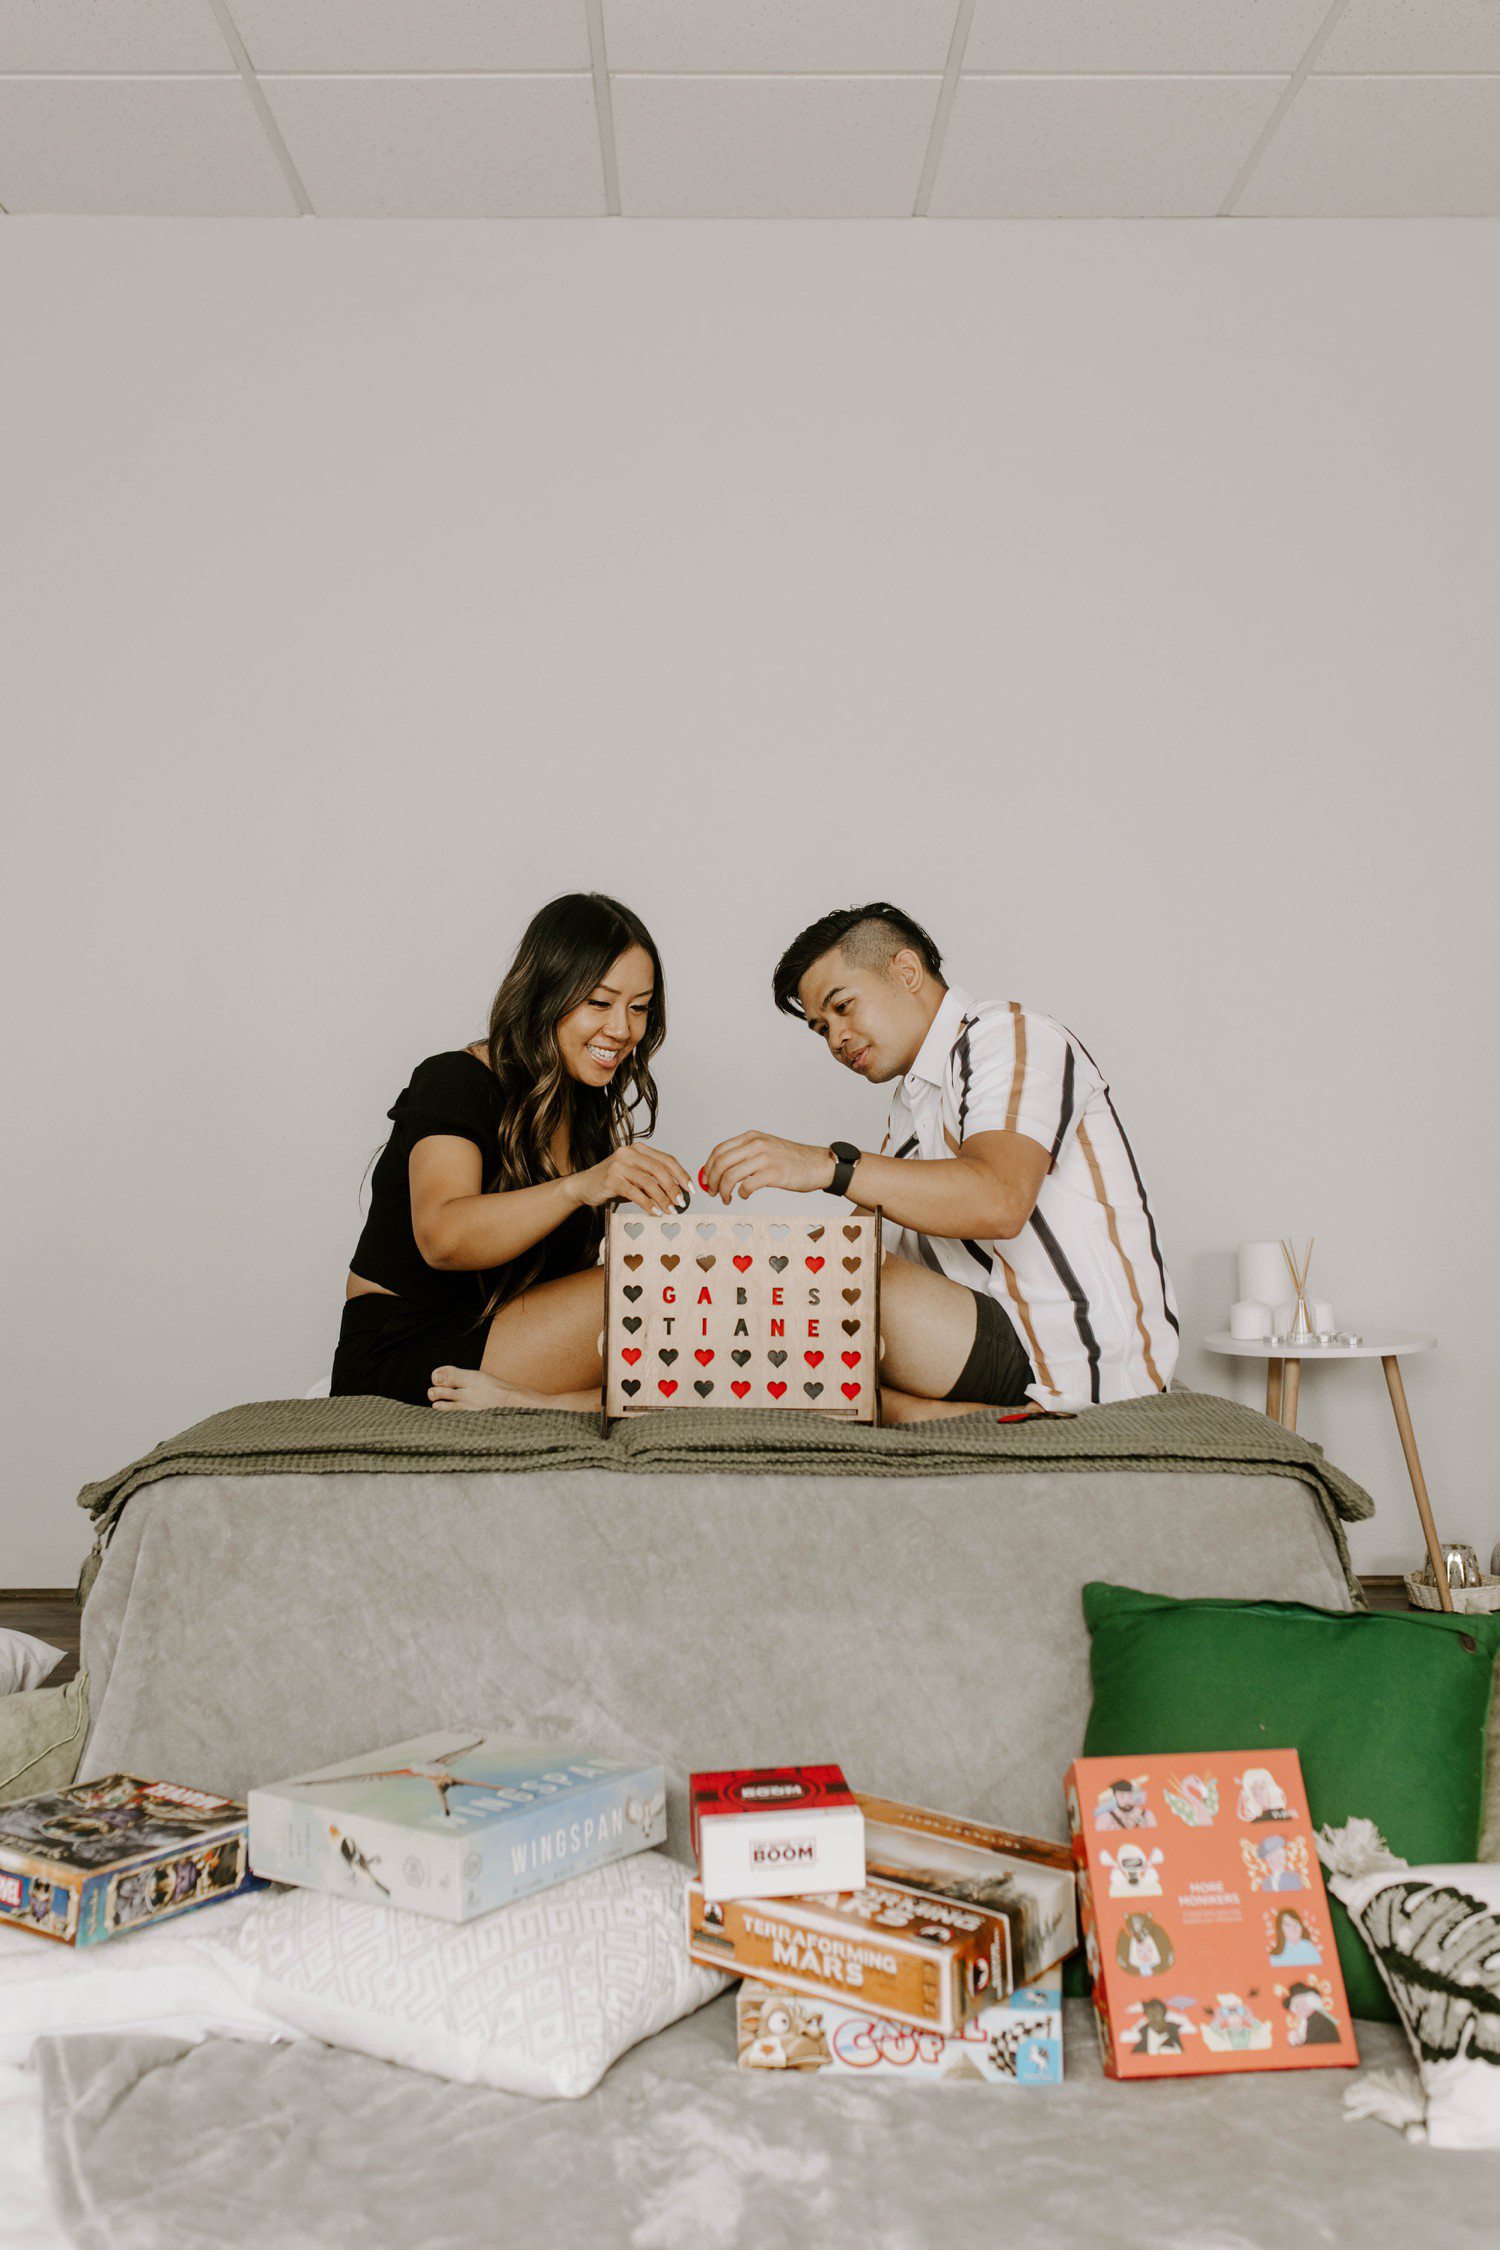 Engagement Photos with Board Game